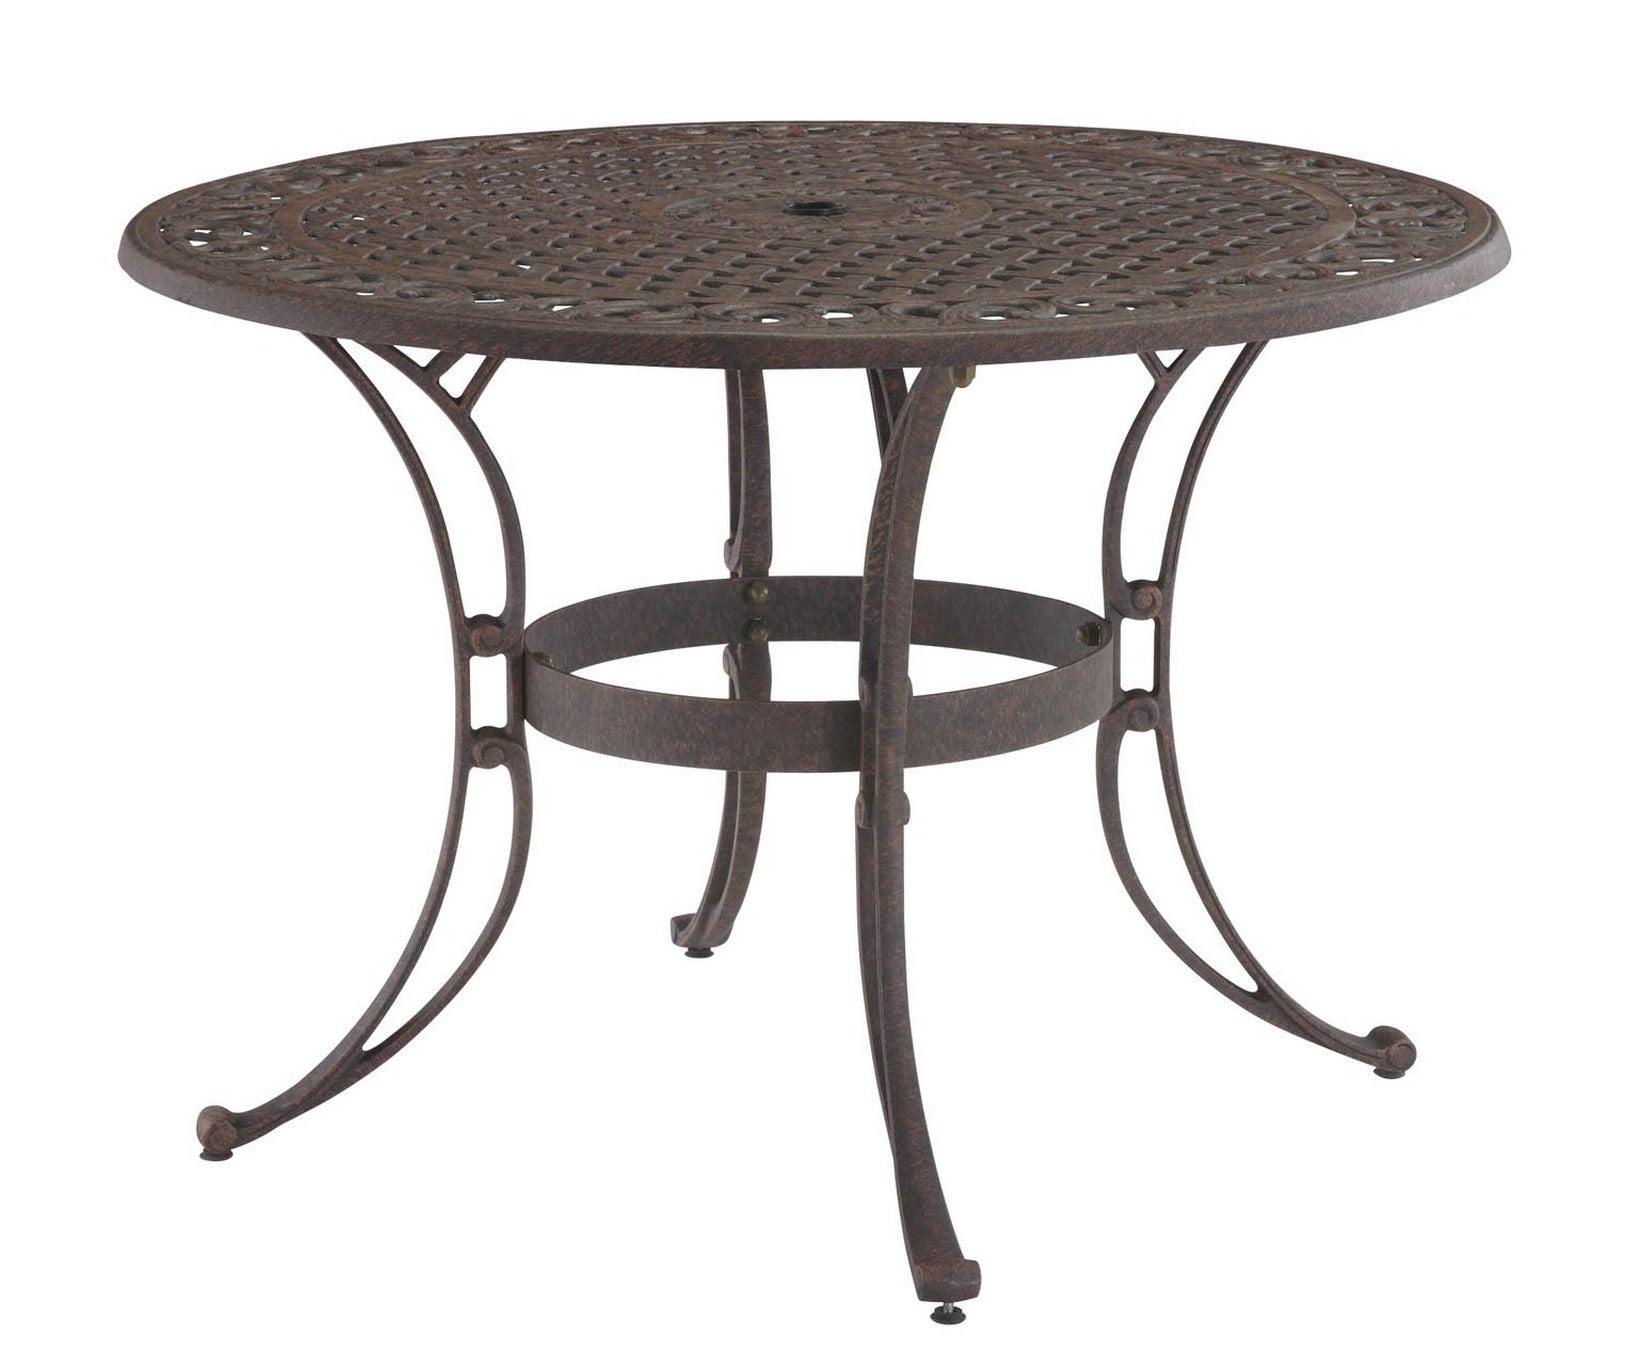 Sanibel 5 Piece Outdoor Dining Set by Homestyles - Bronze - Aluminum, Upholstered, Fabric - 6655-305C